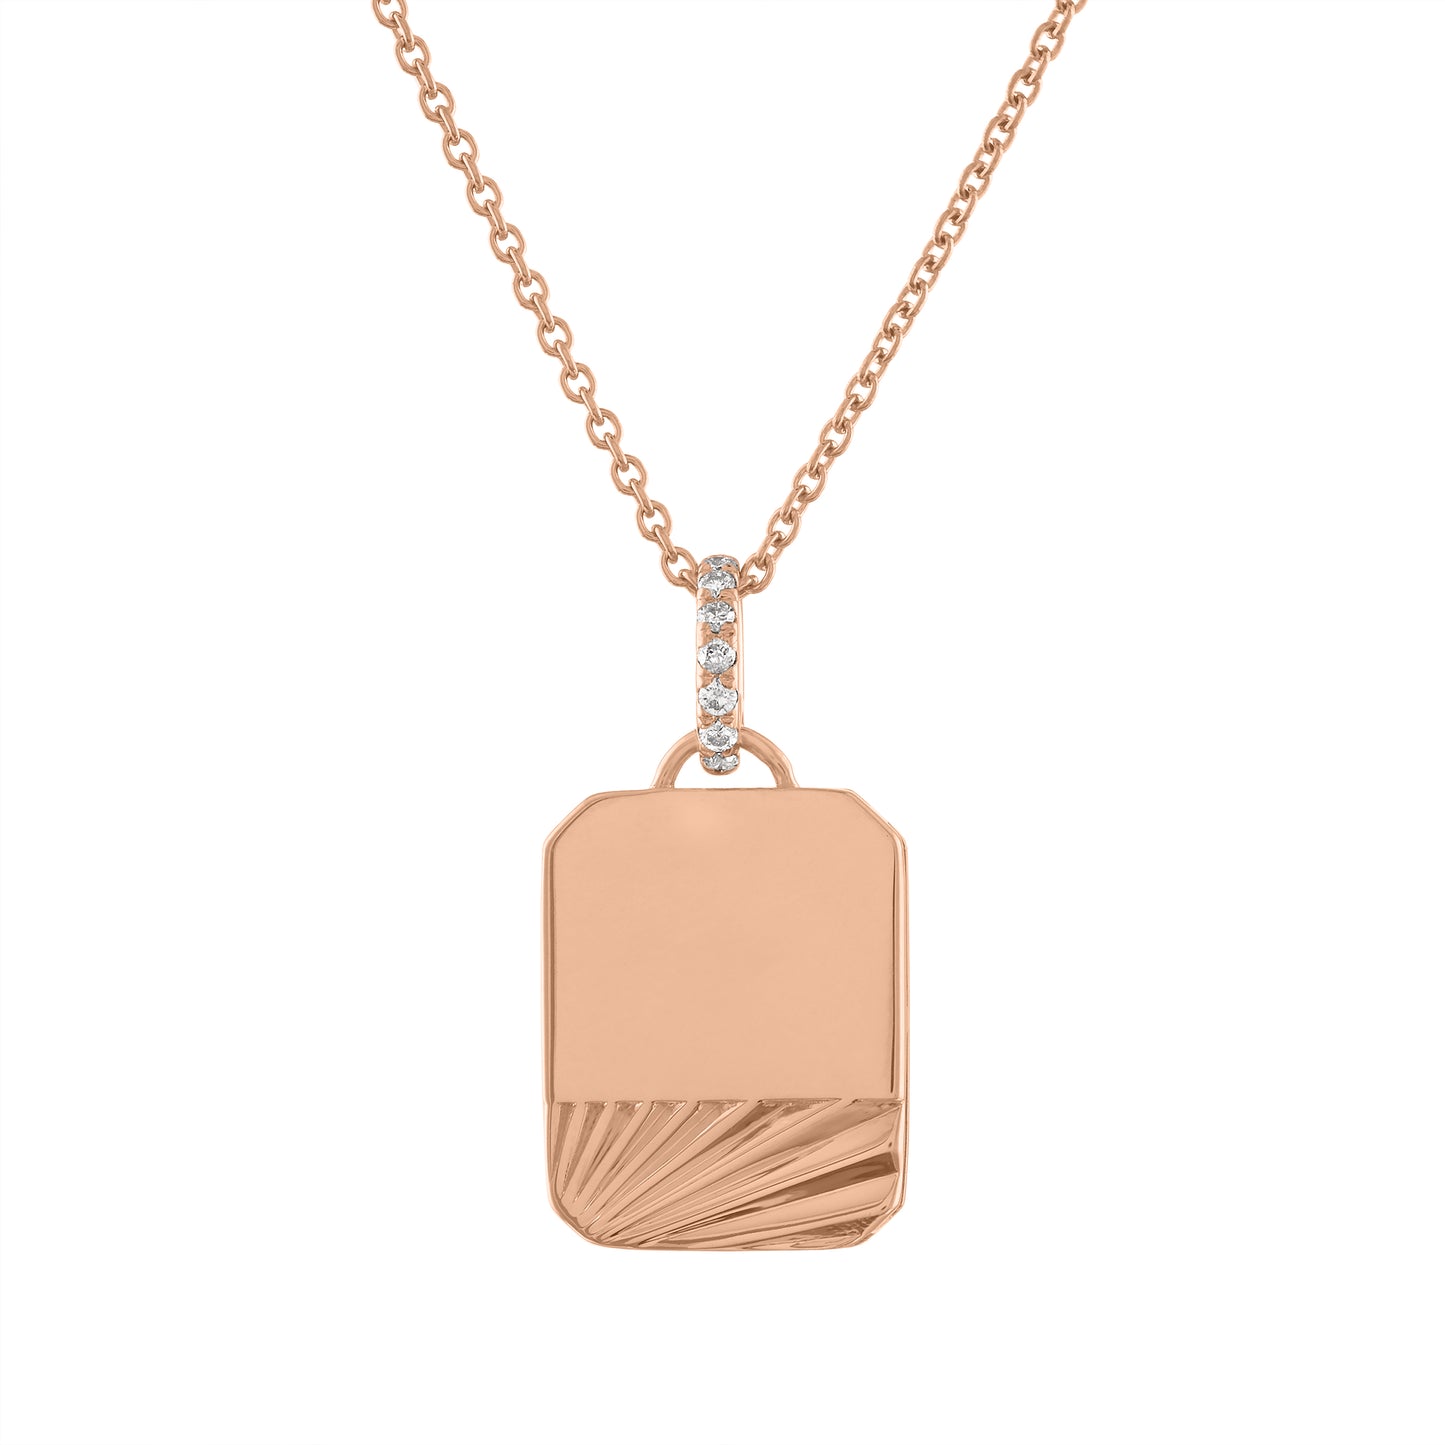 Rose gold small engravable dogtag necklace with fluting and a diamond bail. 